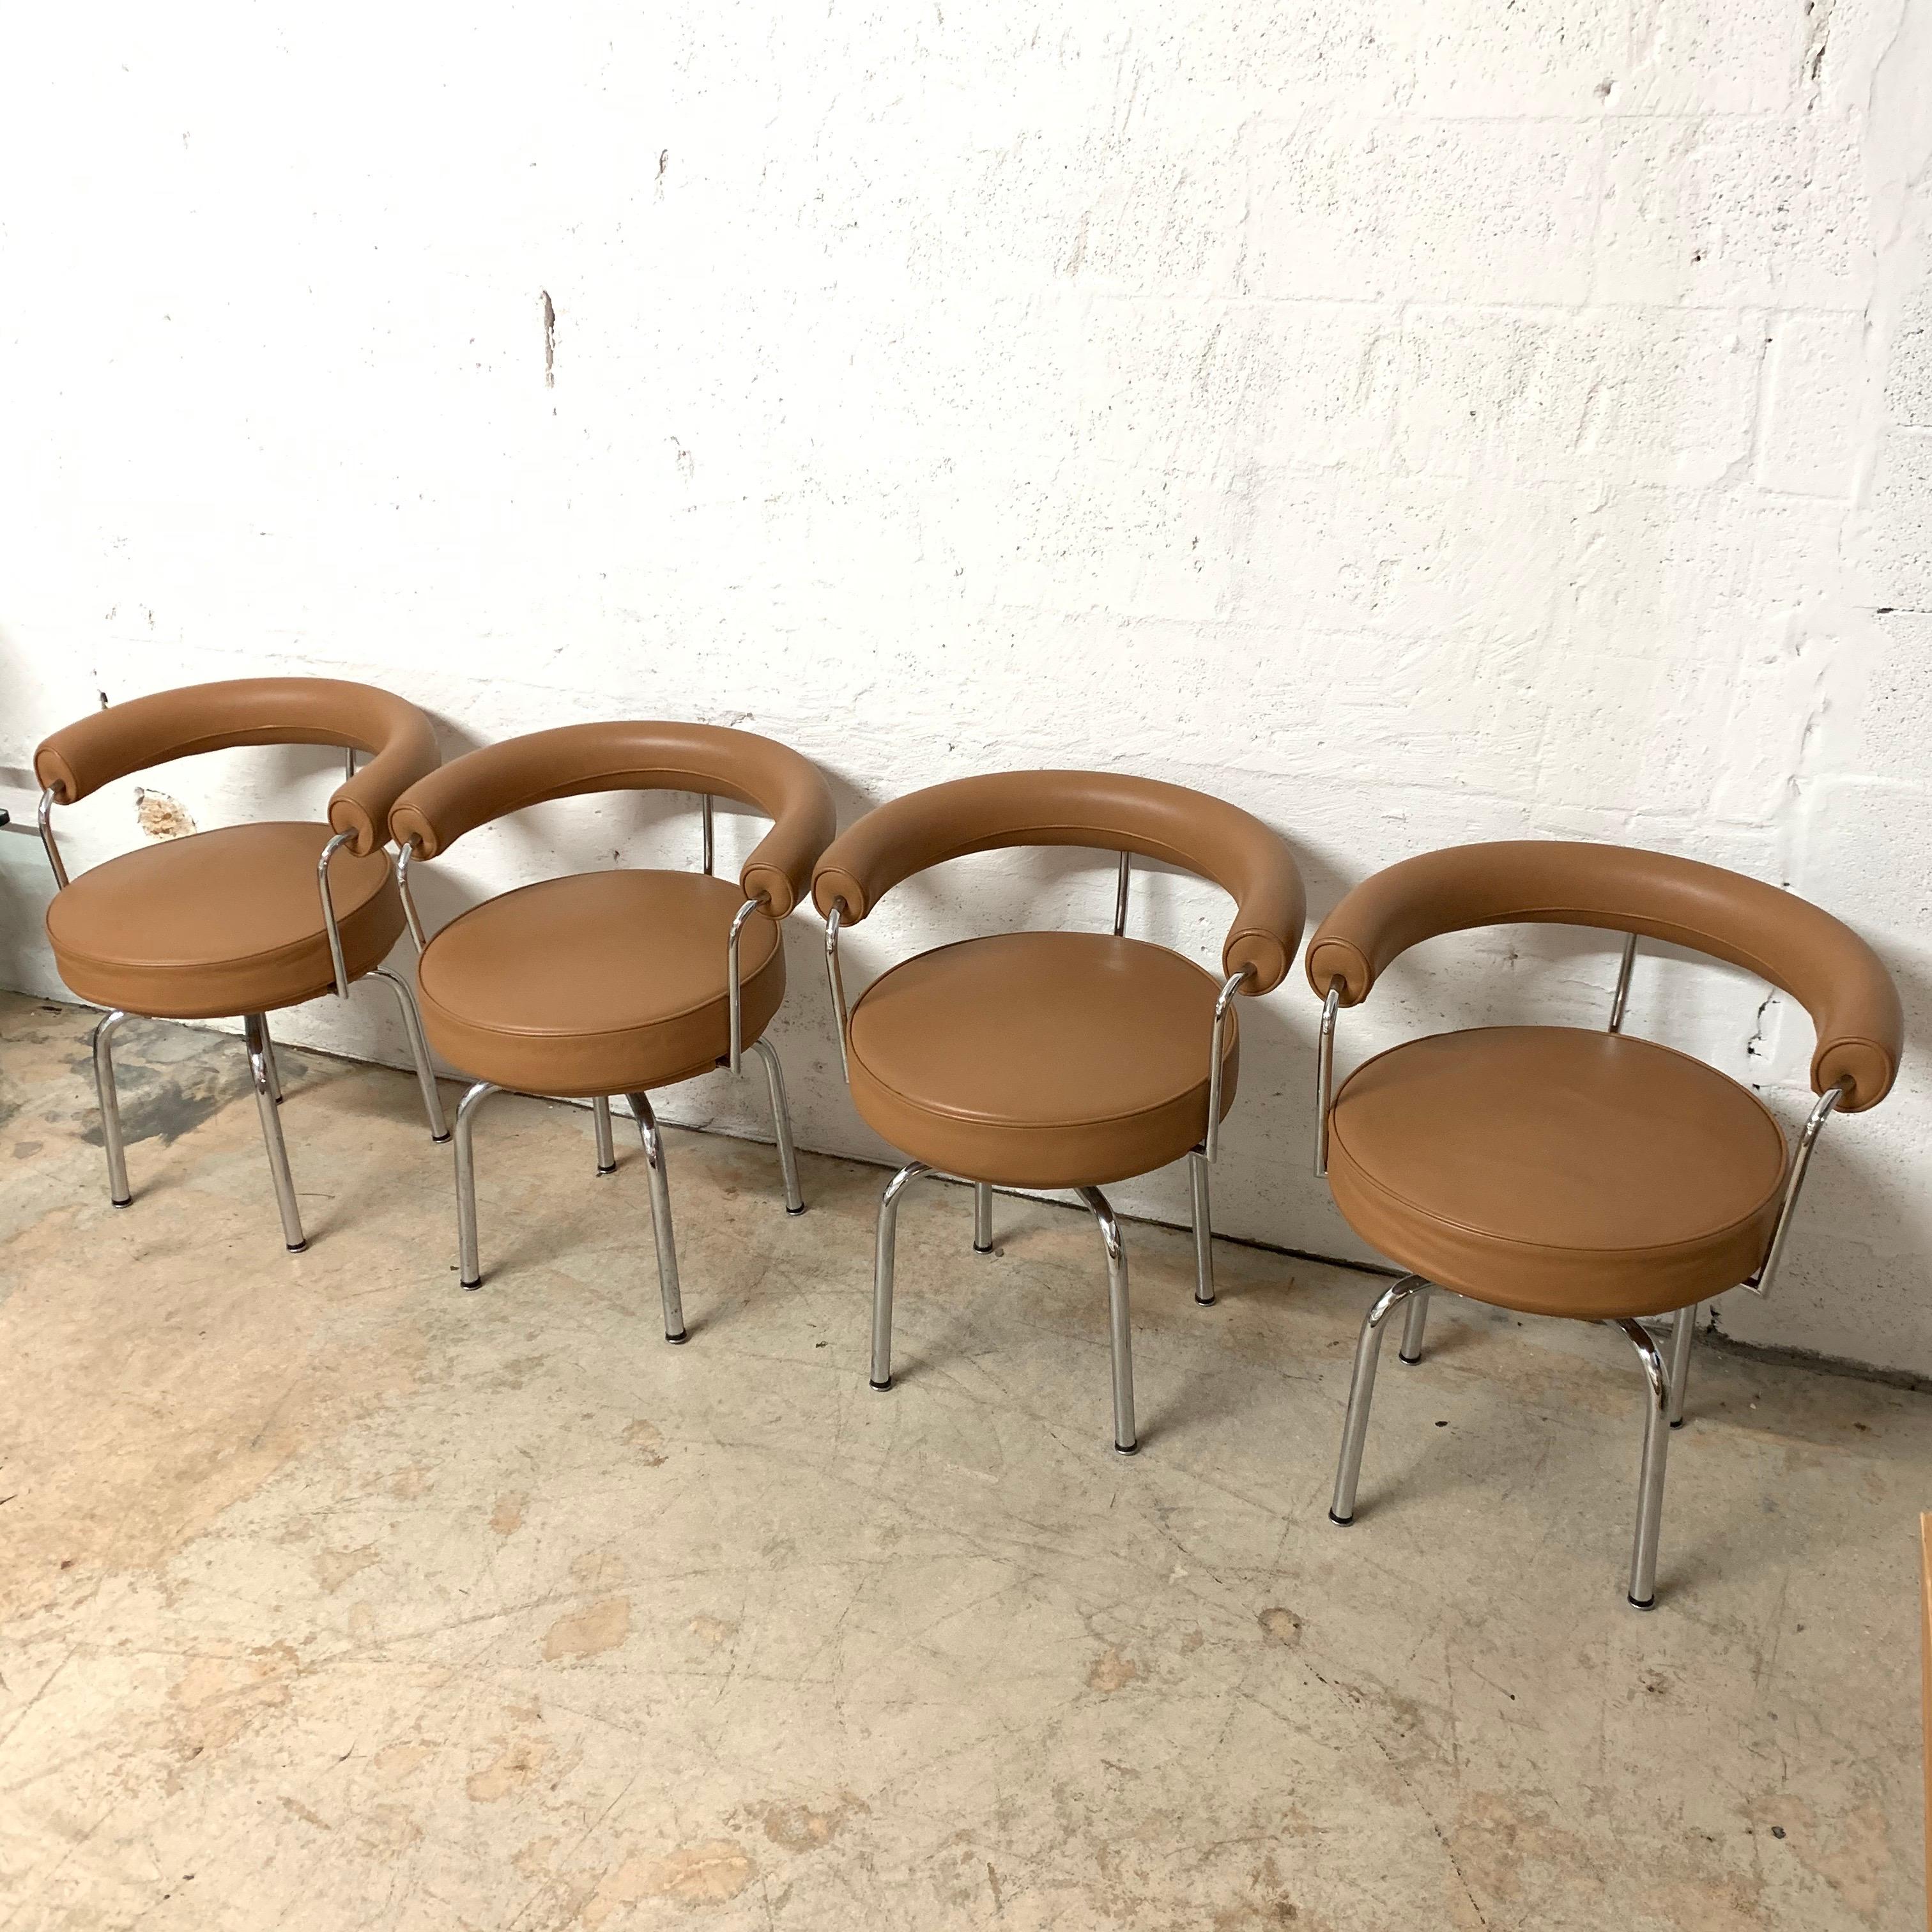 Set of four LC7 swivel dining chairs rendered in a chrome-plated steel frame with cognac leather upholstery designed by Le Corbusier, Charlotte Perriand, and Pierre Jeanneret for Cassina, Italy, 1970s.